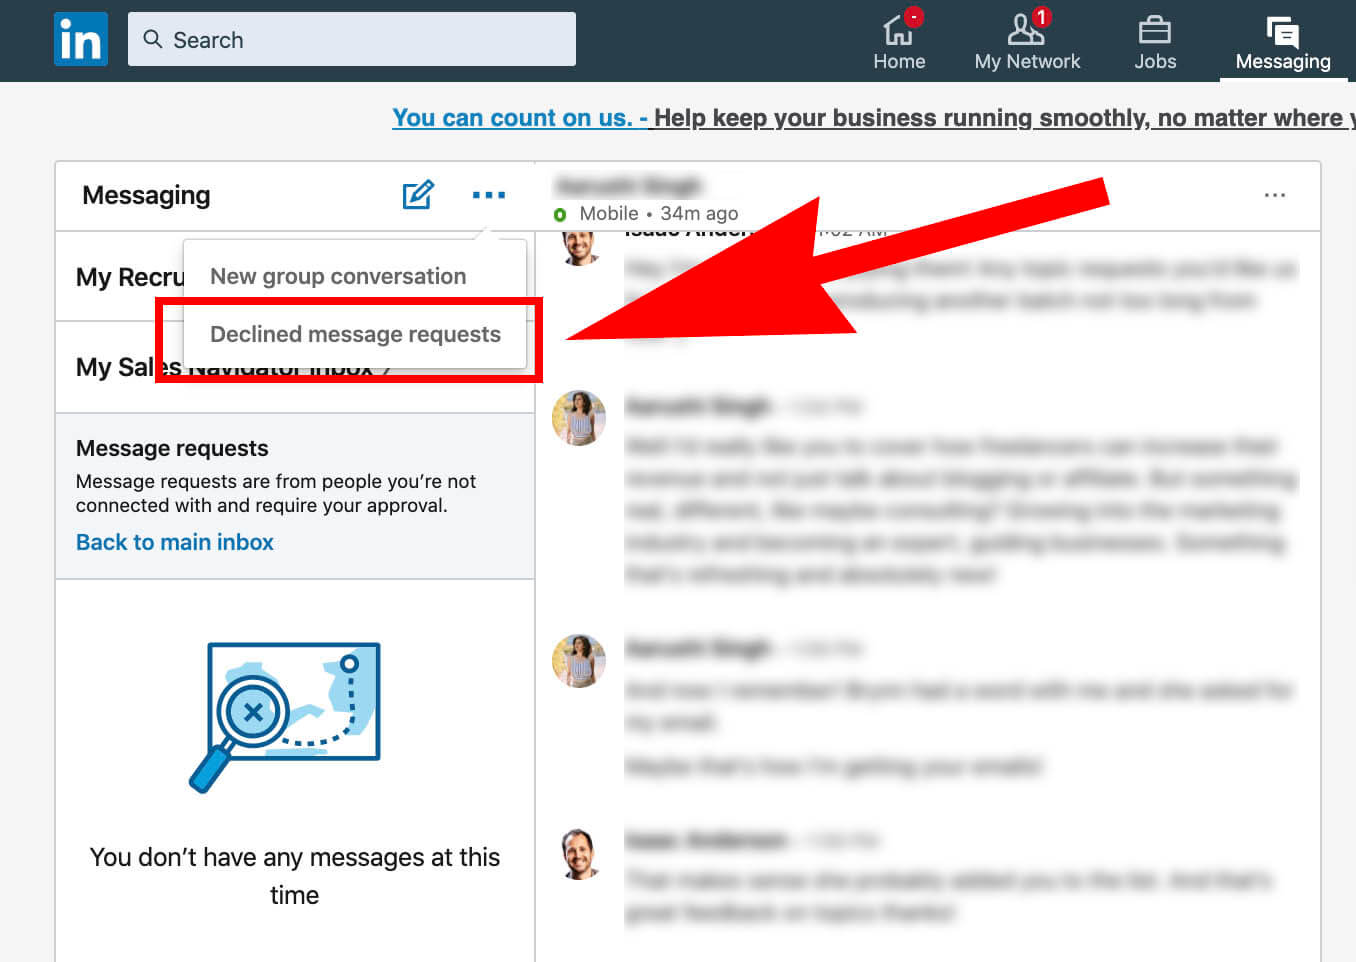 Linkedin Message Request - Declined Message Requests